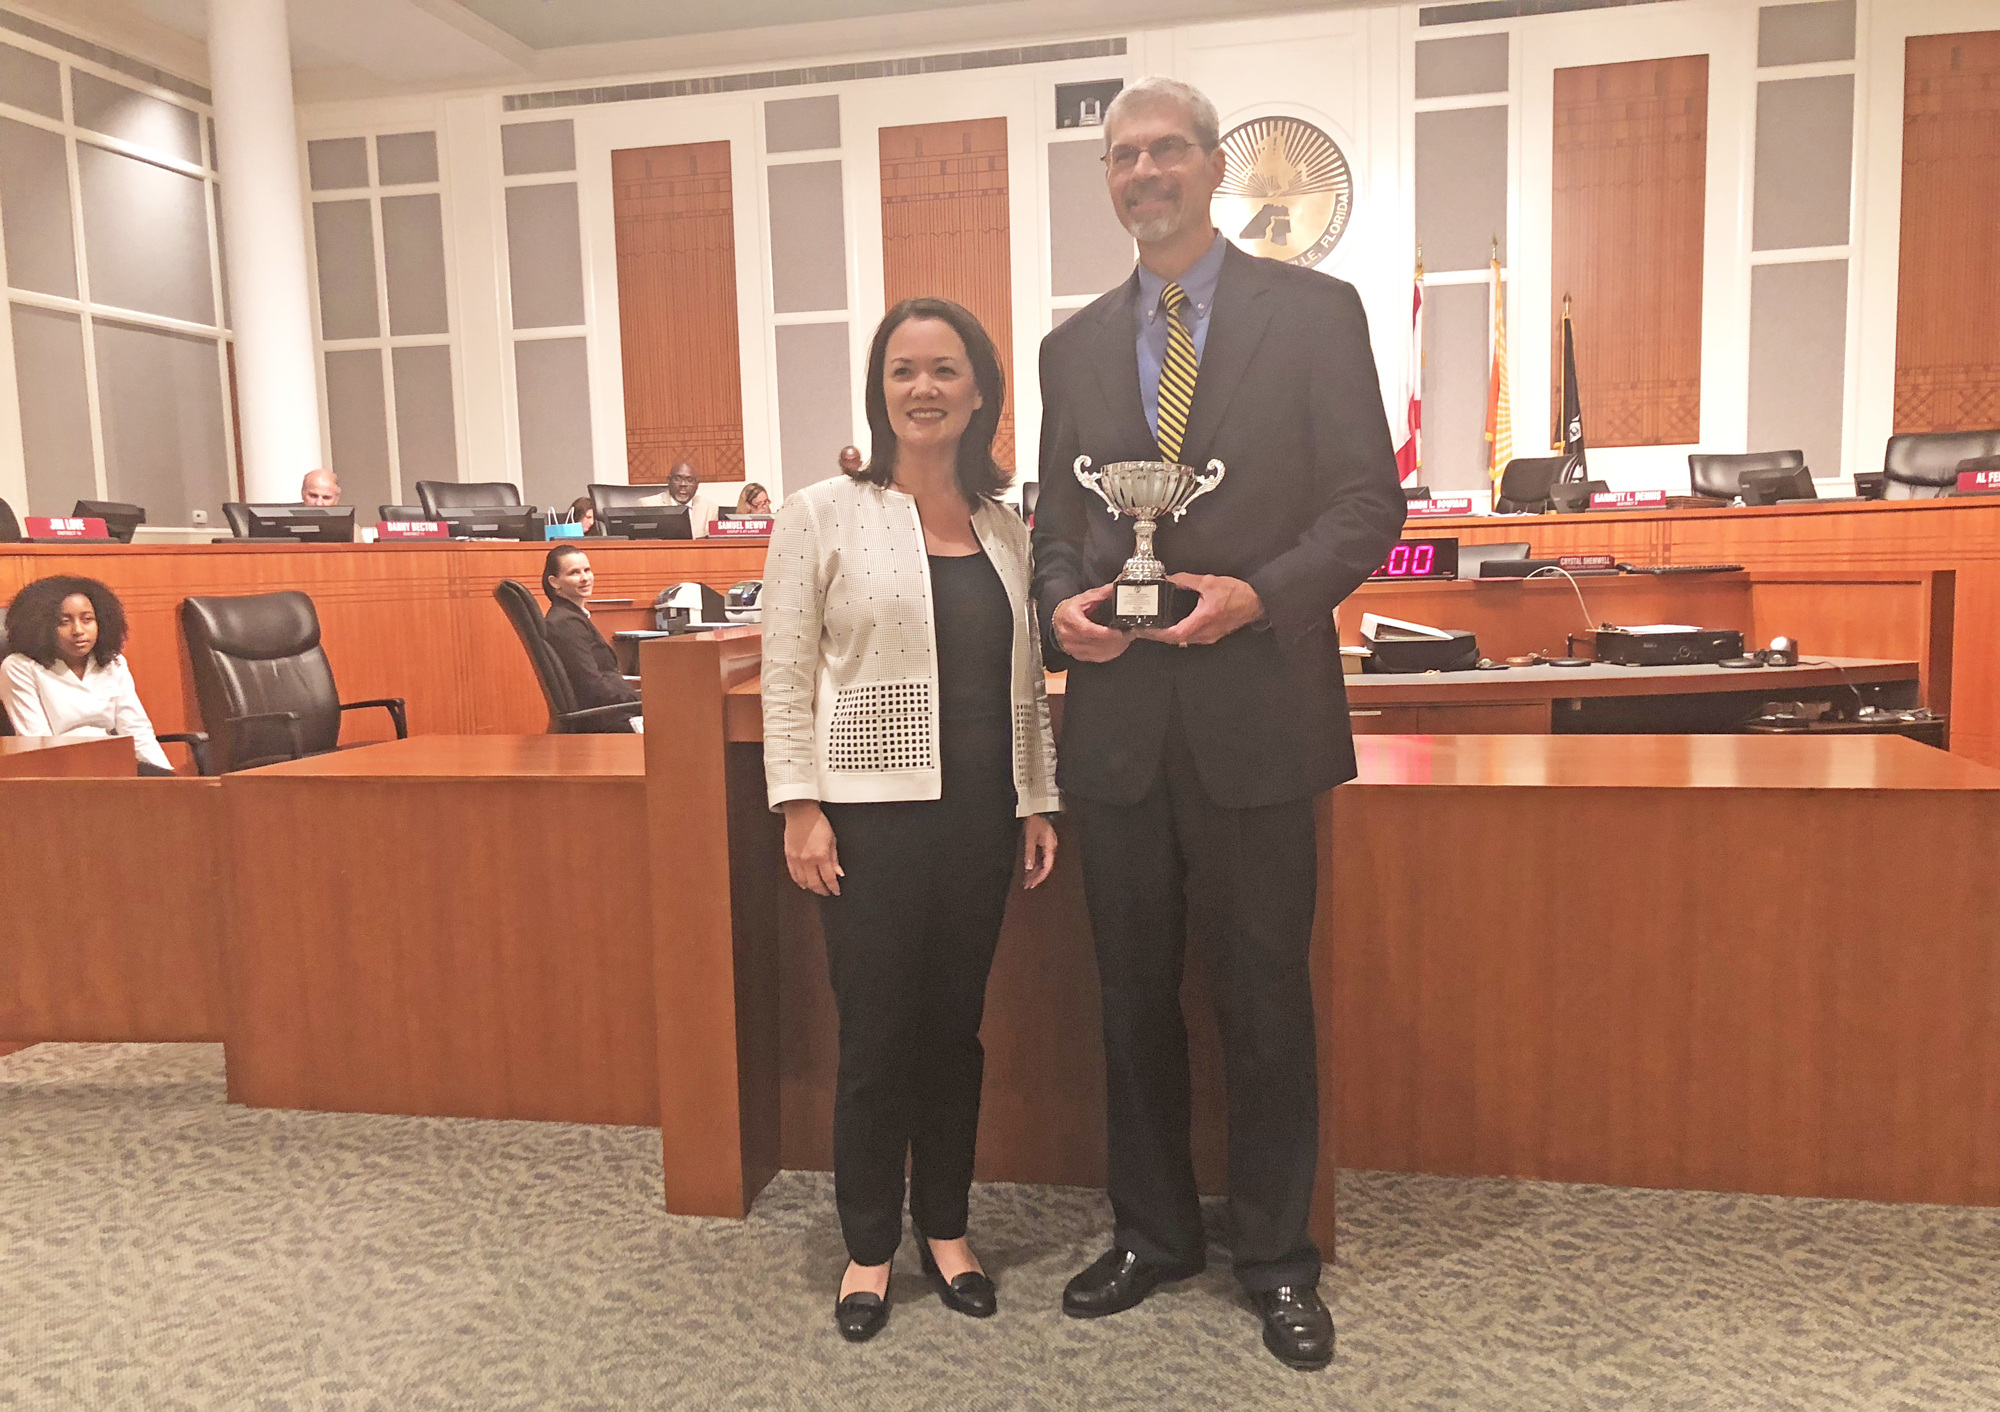 City Council Auditor Kyle Billy was honored with the Robert O. Johnson Good Government Award presented by council President Anna Brosche.